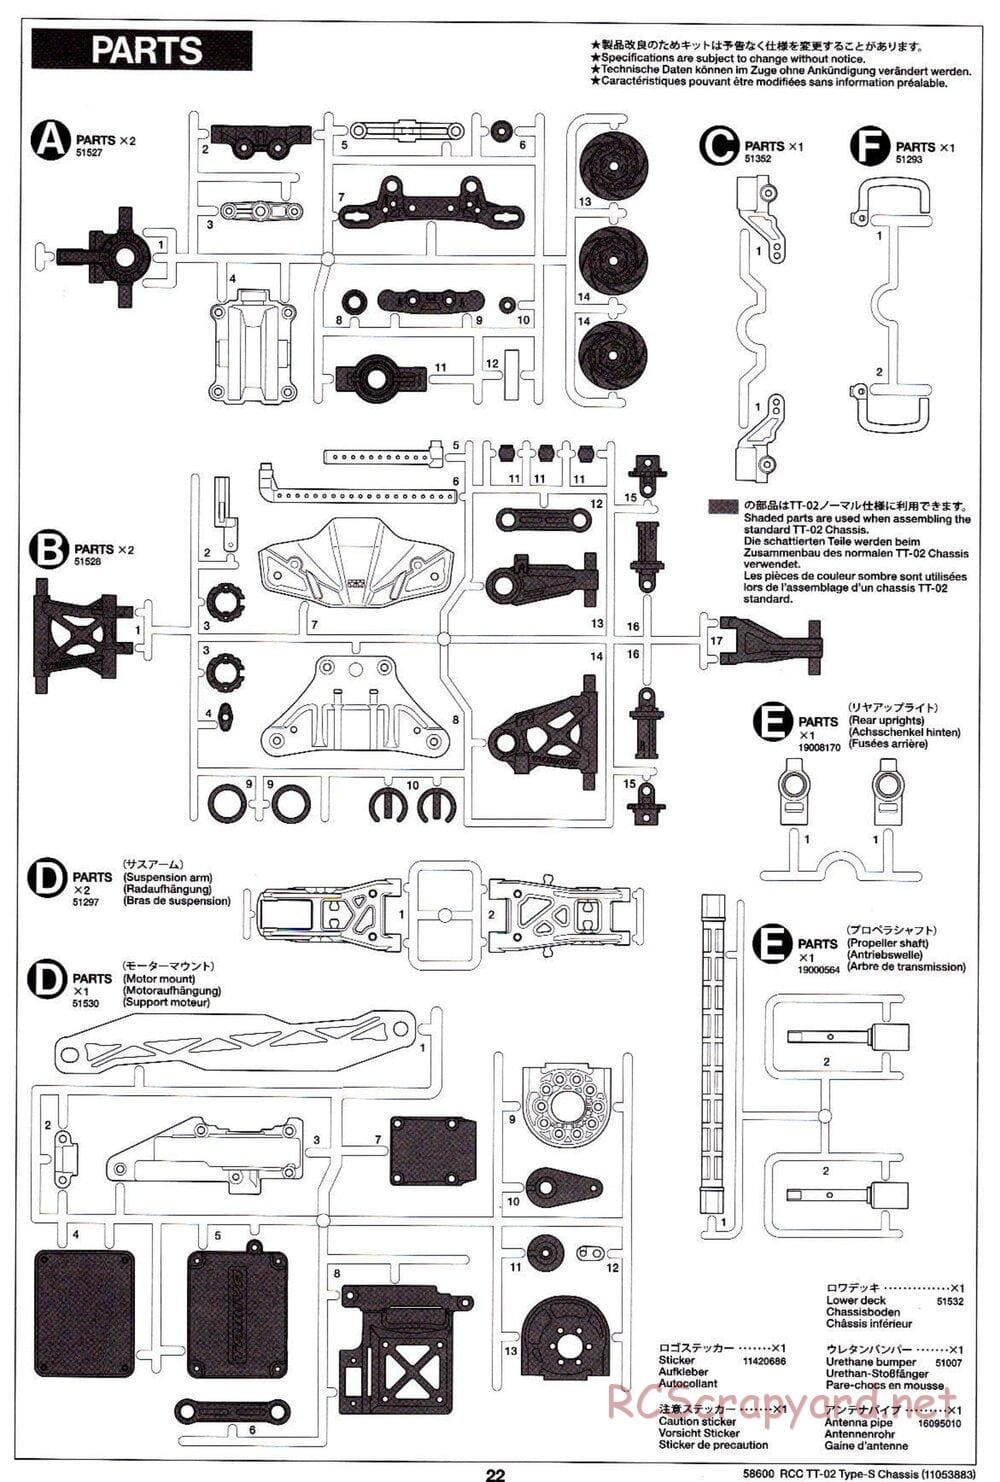 Tamiya - TT-02 Type-S Chassis - Manual - Page 22